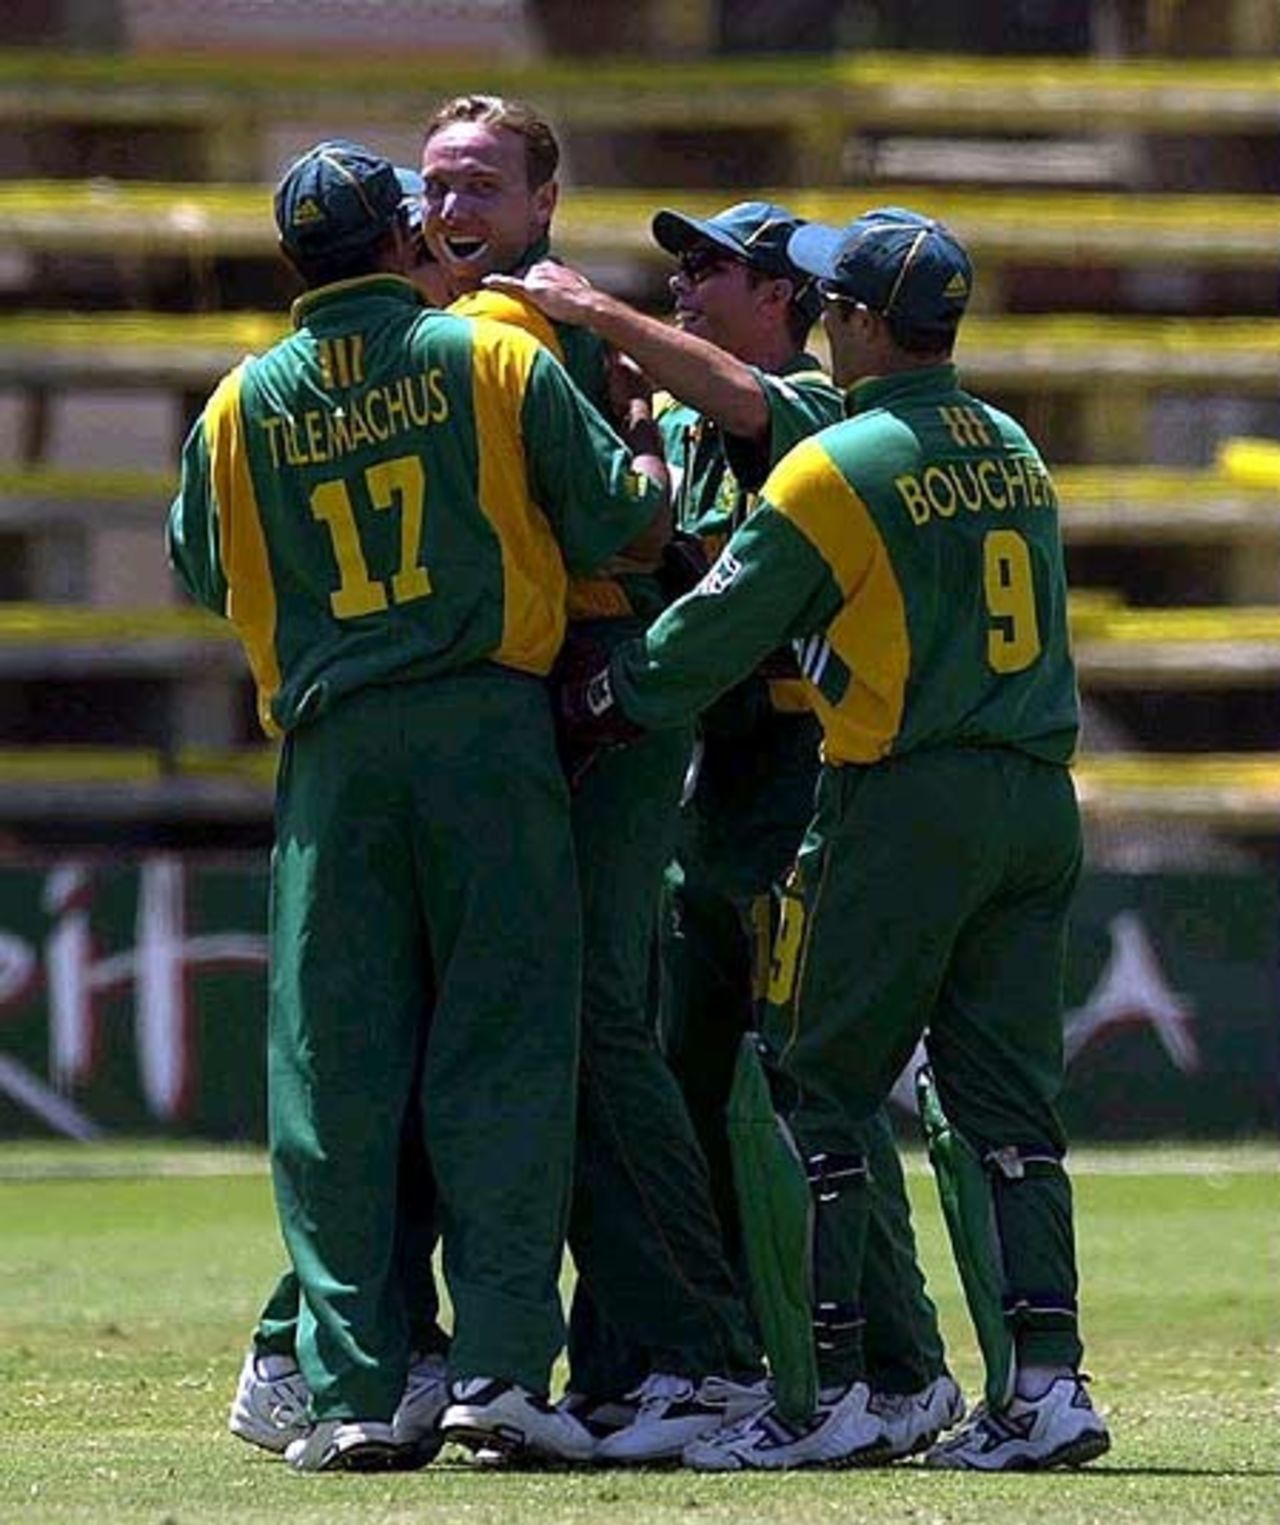 10 Oct 2000: Allan Donald of South Africa celebrates taking the wicket of Alec Stewart of England during the England v South Africa second round match of the ICC Knockout tournament at the Gymkhana Club Ground, Nairobi, Kenya.